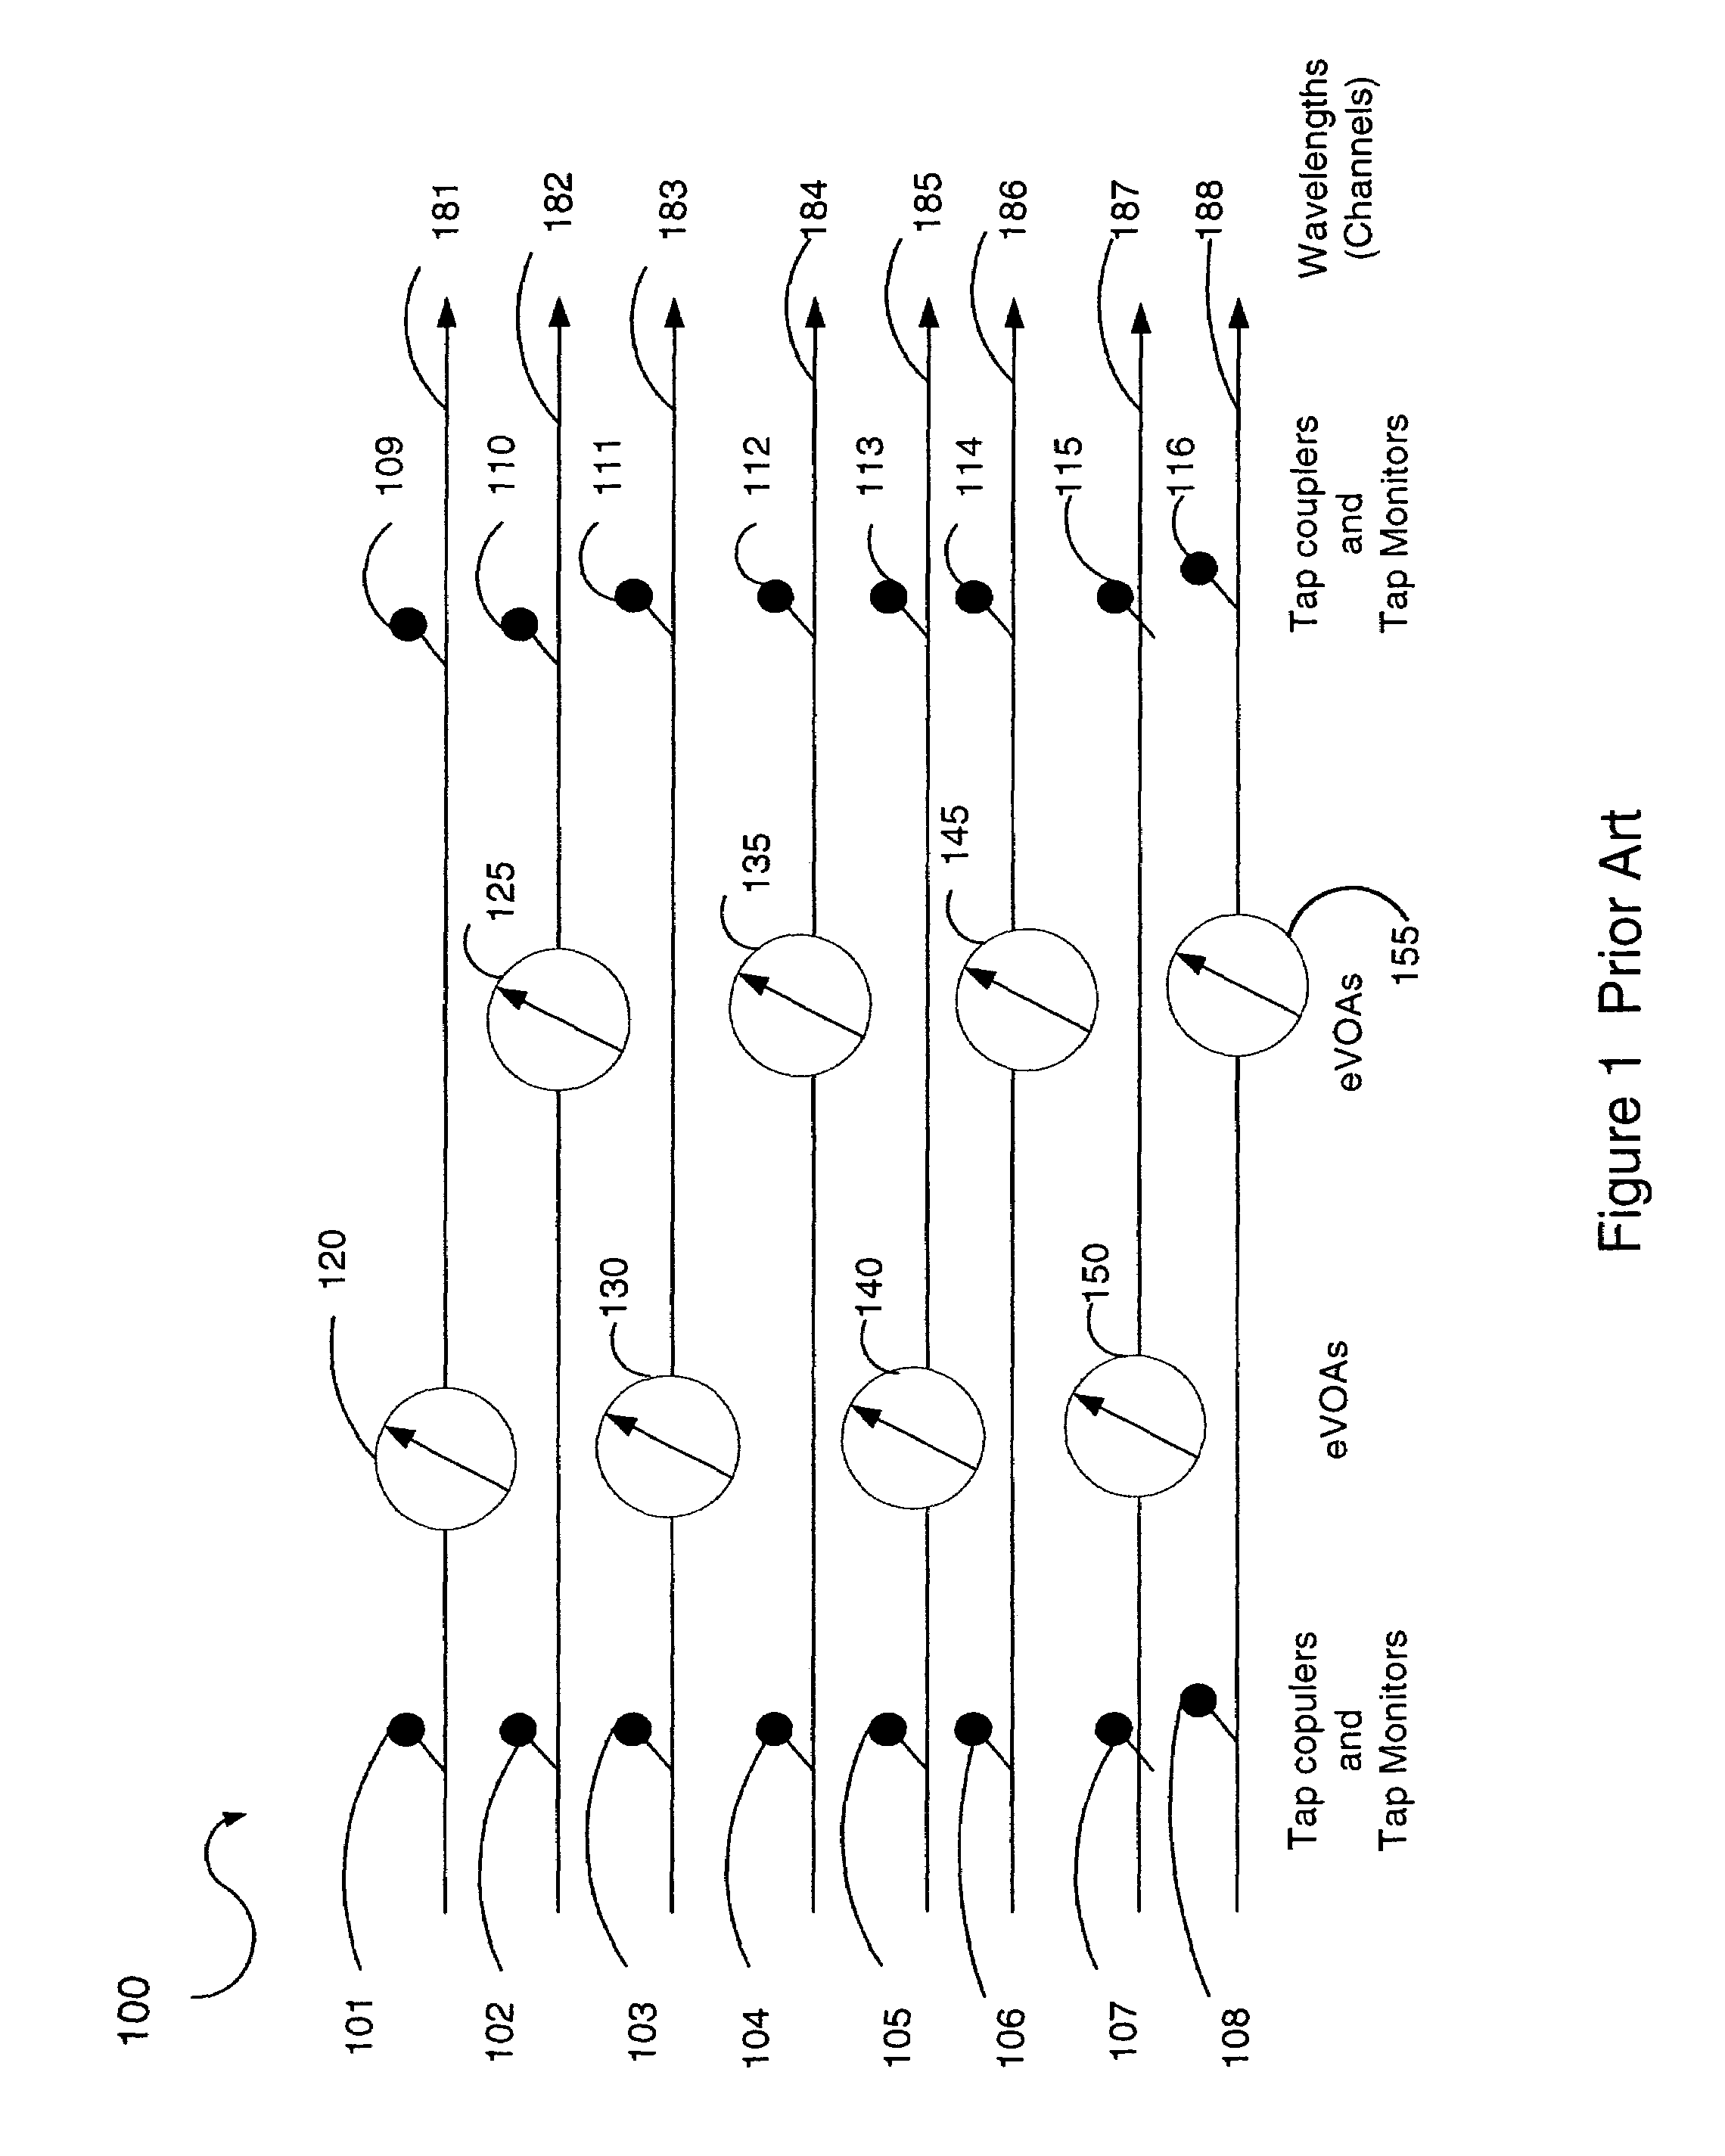 Method and system for operating a plurality of electronic variable optical attenuators (eVOAs)